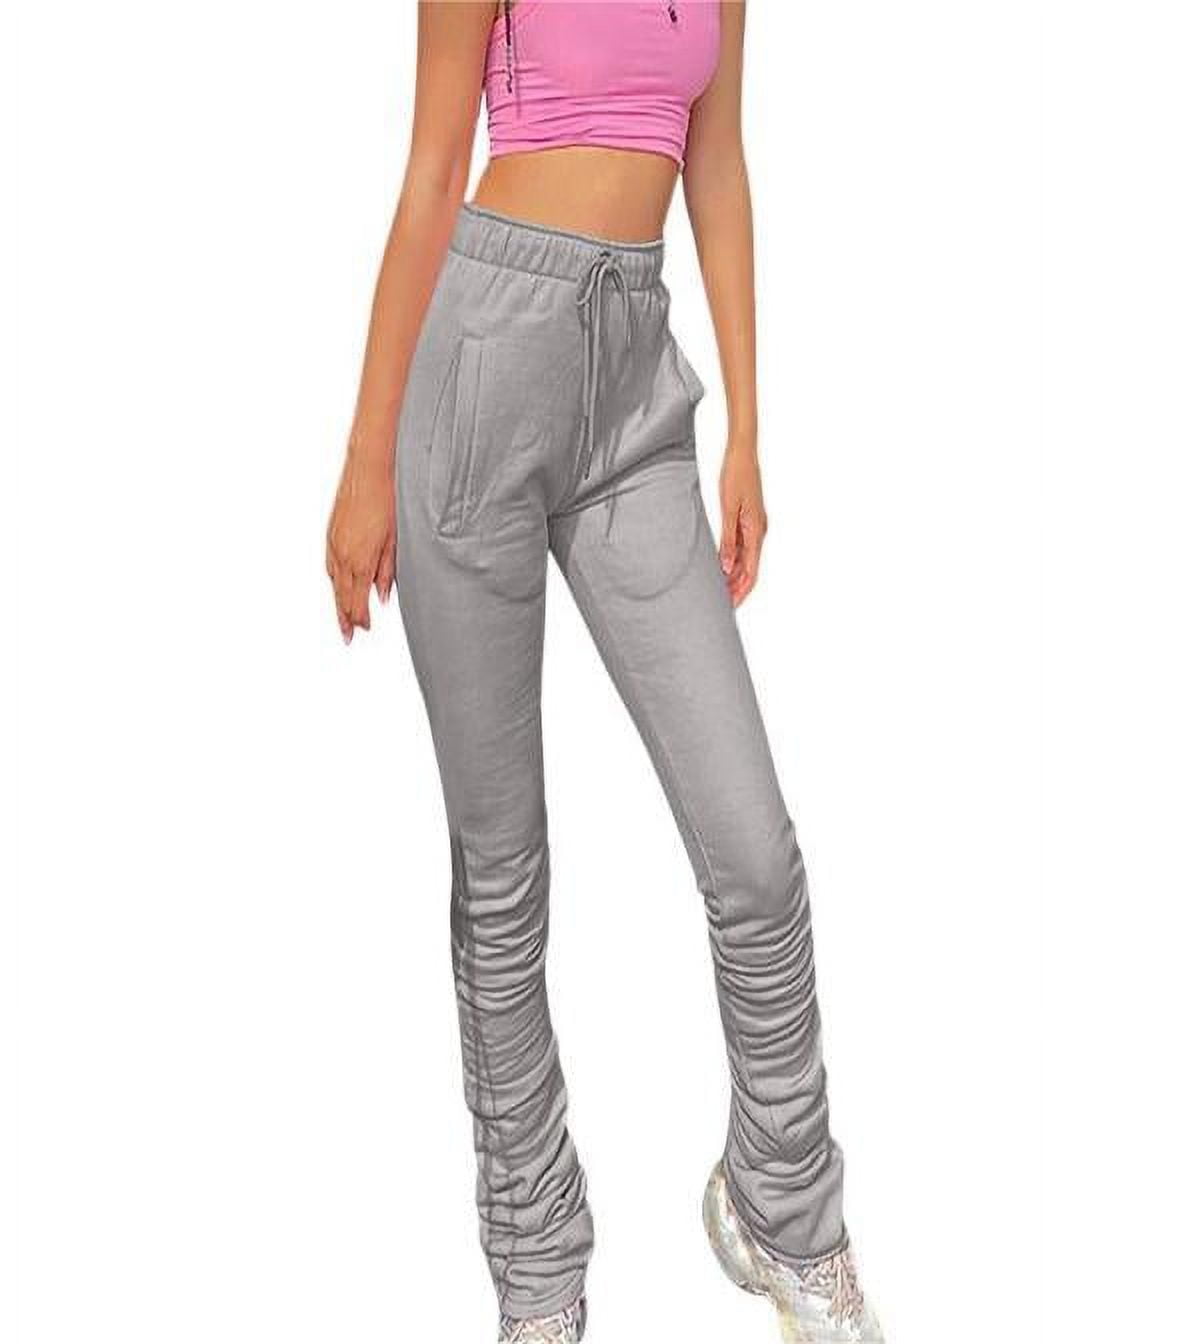 FAIWAD Womens Stacked Sweatpants Elastic High Waist Baggy Casual Slim  Athletic Jogger Pants (X-Large, Gray)